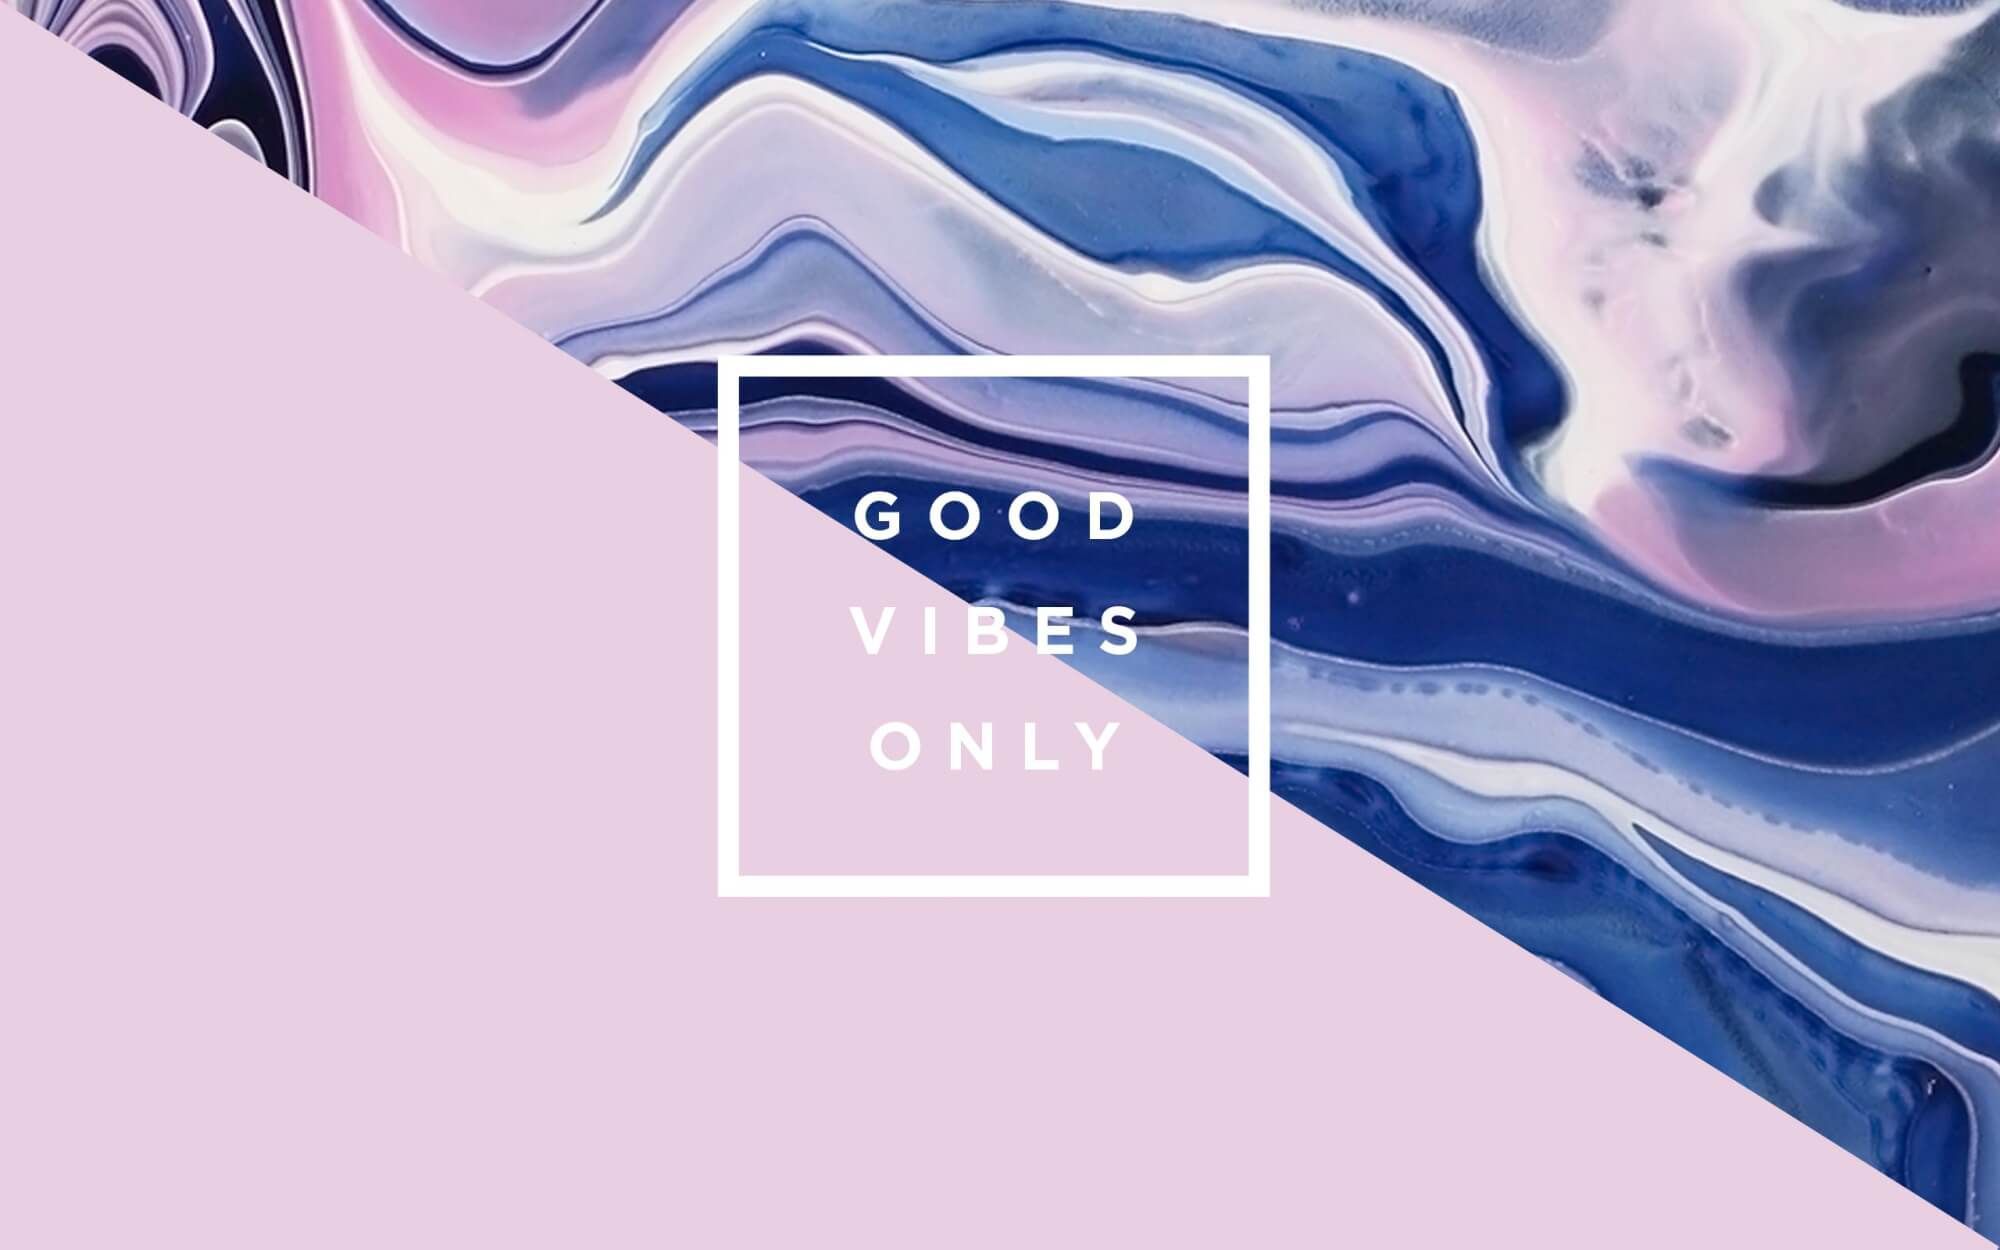 Positive Vibes Background. Good Vibes Wallpaper, Hippie Vibes Wallpaper and Good Vibes Background